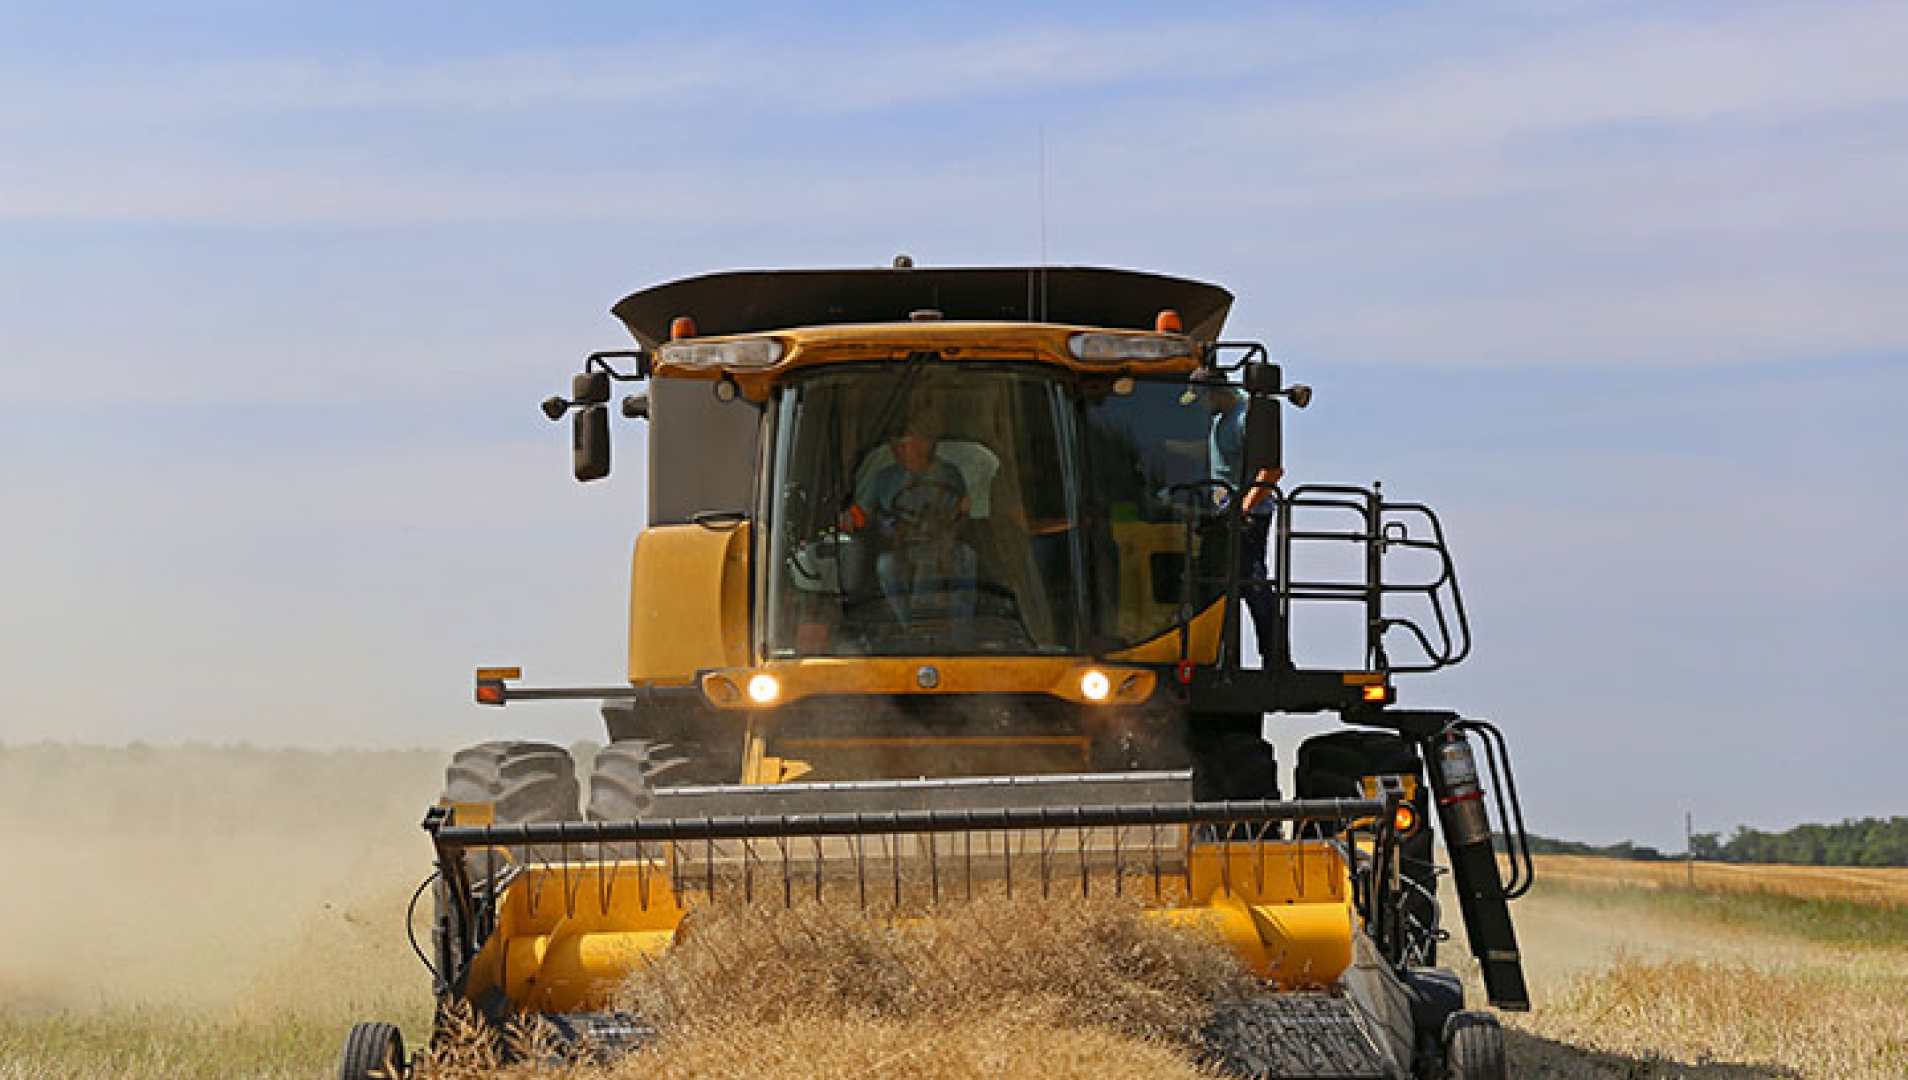 A yellow piece of ag equipment drives through the field toward the camera